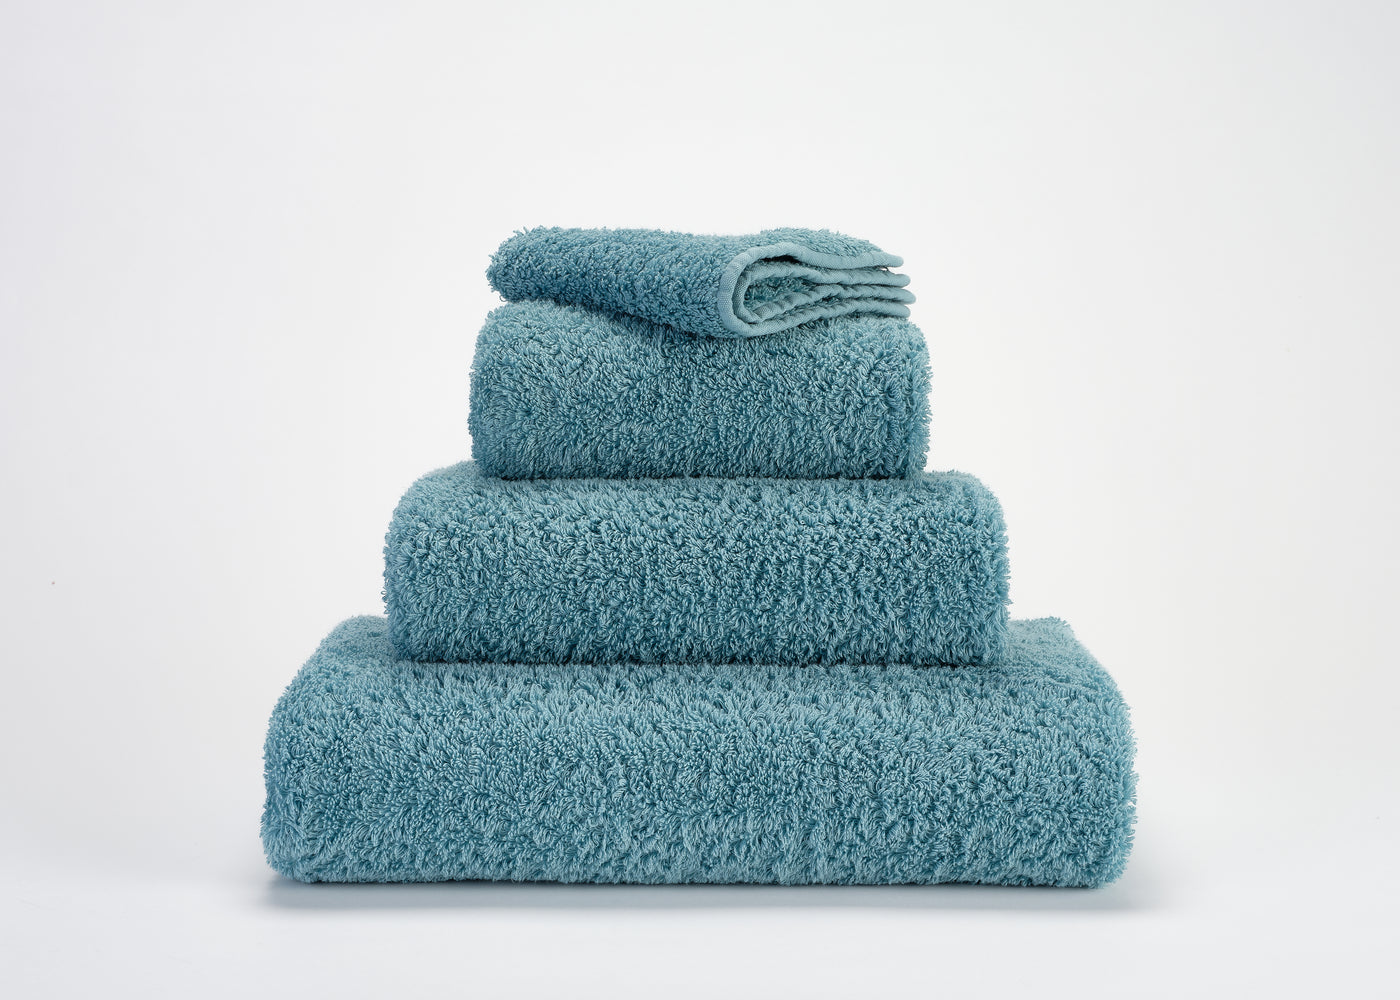 ABYSS & HABIDECOR SUPER PILE TOWEL COLLECTION (Colors 306-336)